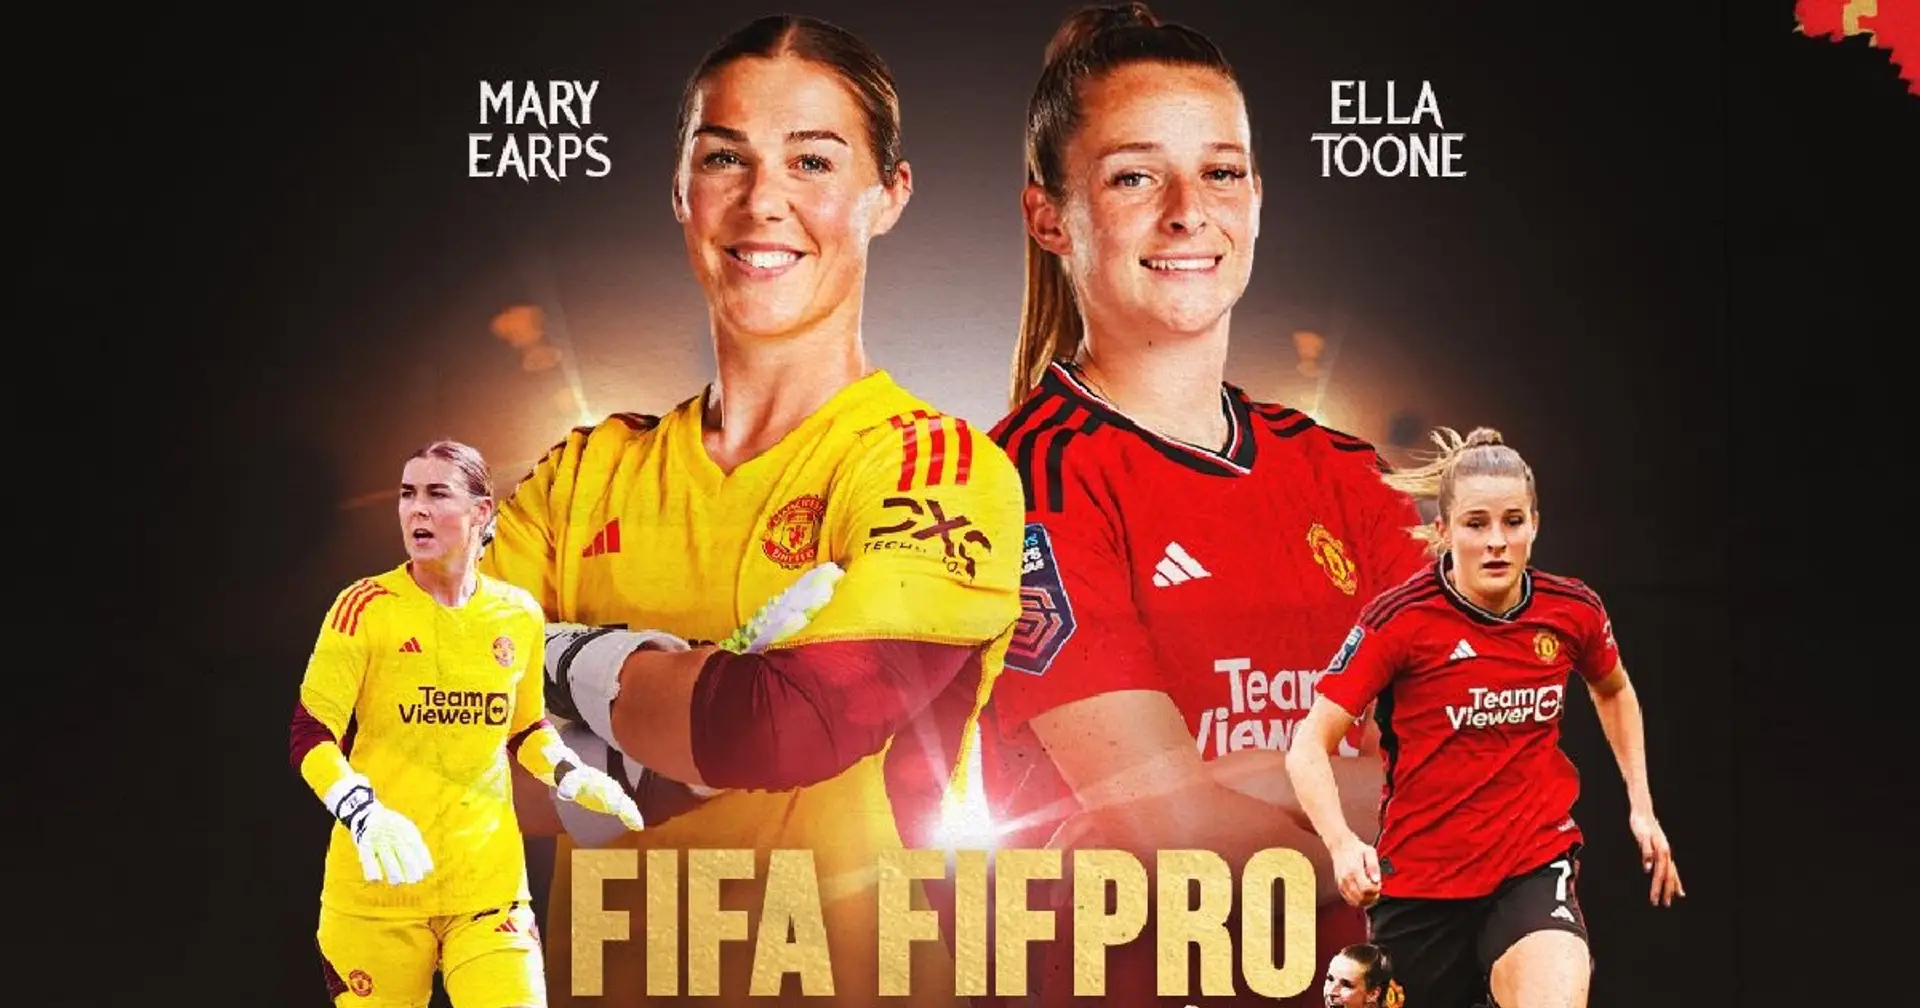 Two Man United players named in Women's Team of the Year & other under-radar stories today